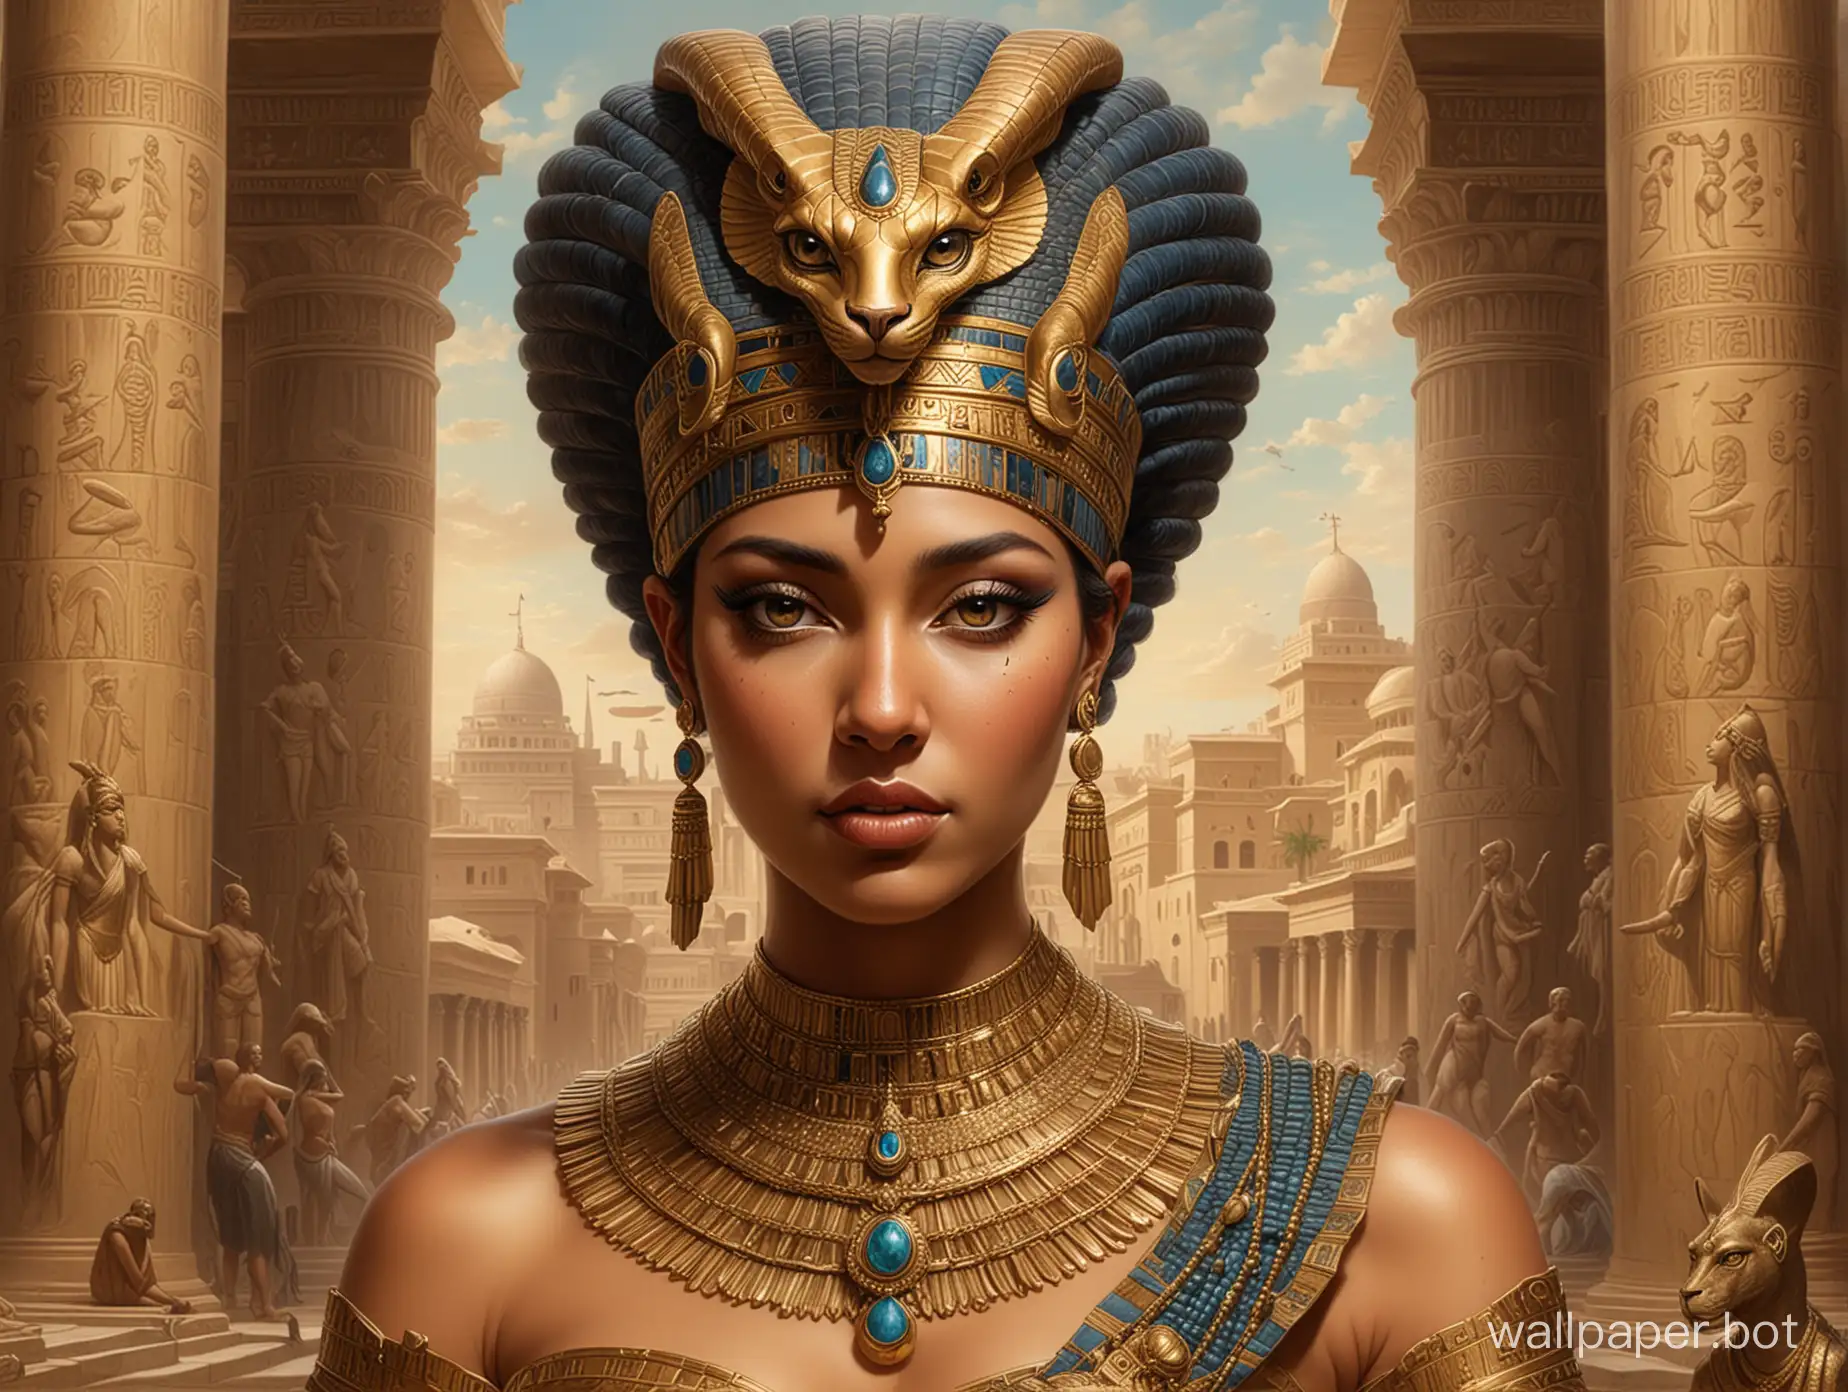 A mesmerizing conceptual art piece of Cleopatra, the queen of ancient Egypt. She is depicted as a regal and alluring woman, wearing a gold headdress with a cobra on top, and adorned with exquisite jewelry. Her eyes are full of intelligence and strength. The background shows an Egyptian palace, with columns and sculptures filled with hieroglyphics. The overall atmosphere of the piece is rich in culture and history, with a touch of mystique and power., conceptual art